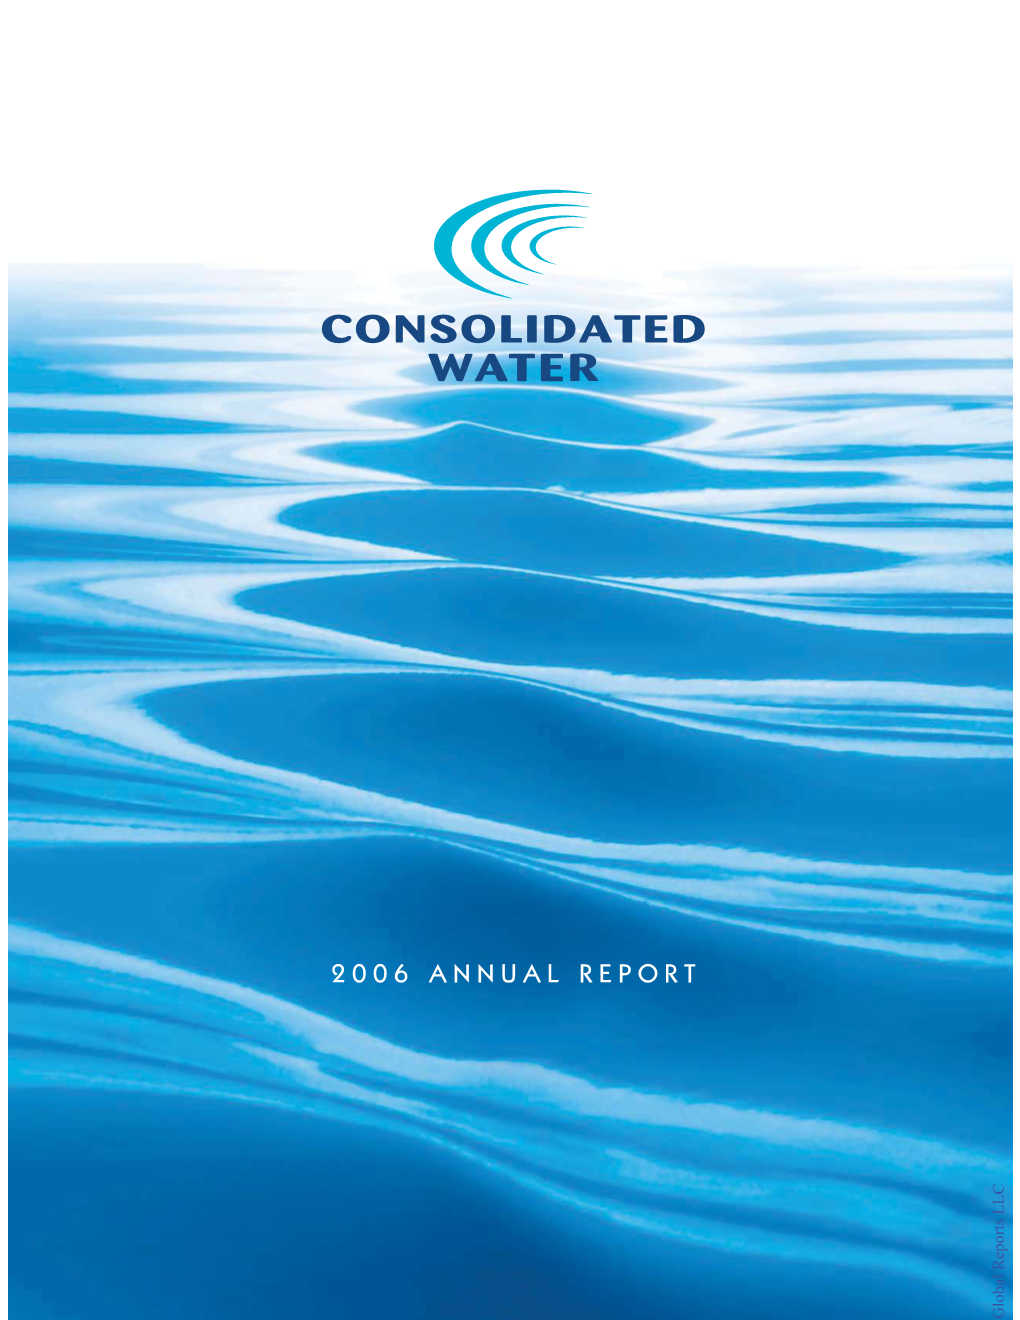 2006 ANNUAL REPORT Global Reports LLC OUR LOCATIONS